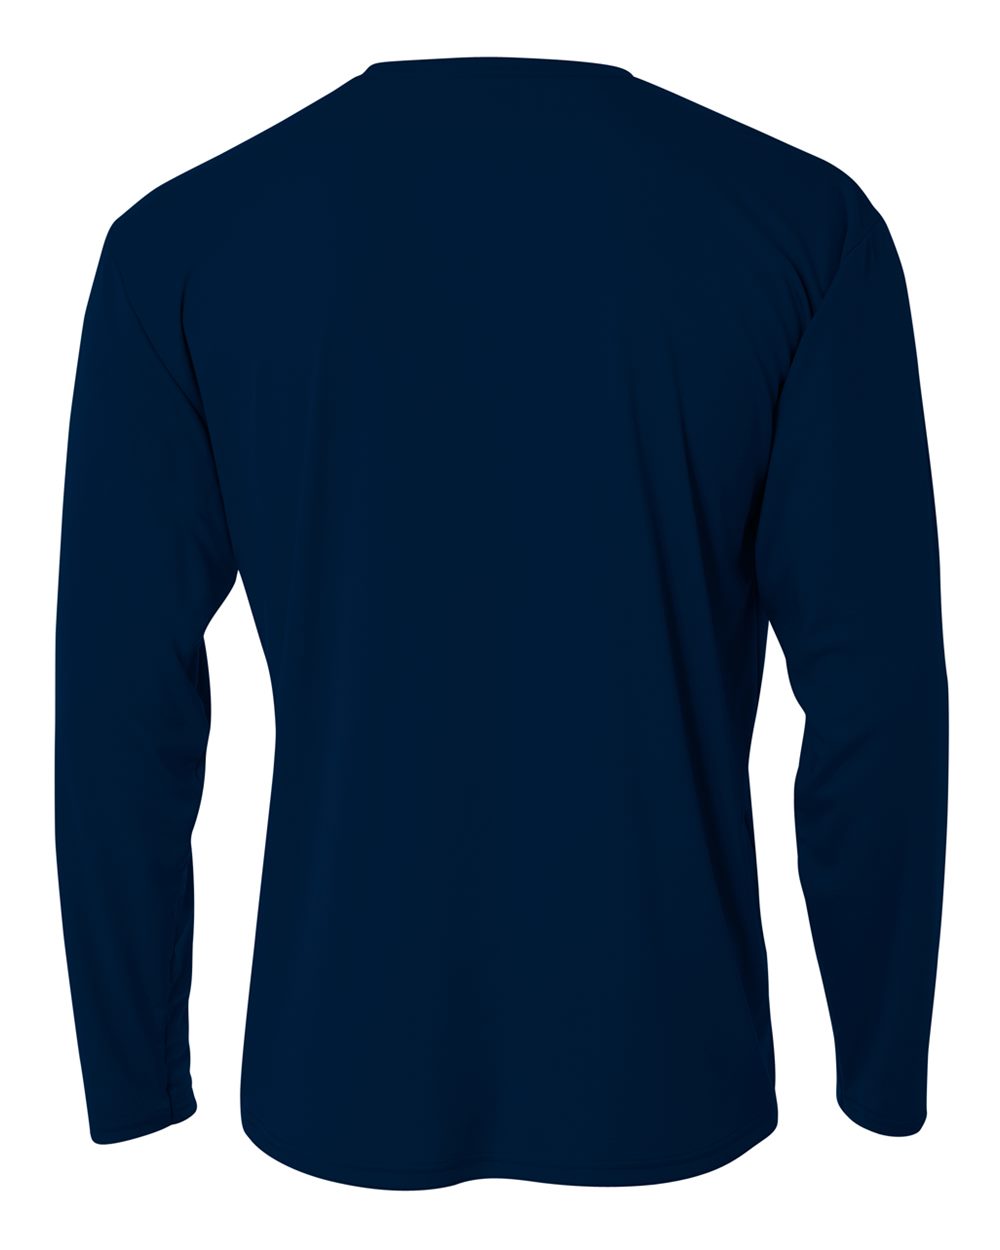 A4288 - Cooling Performance Long Sleeve Crew - One Stop